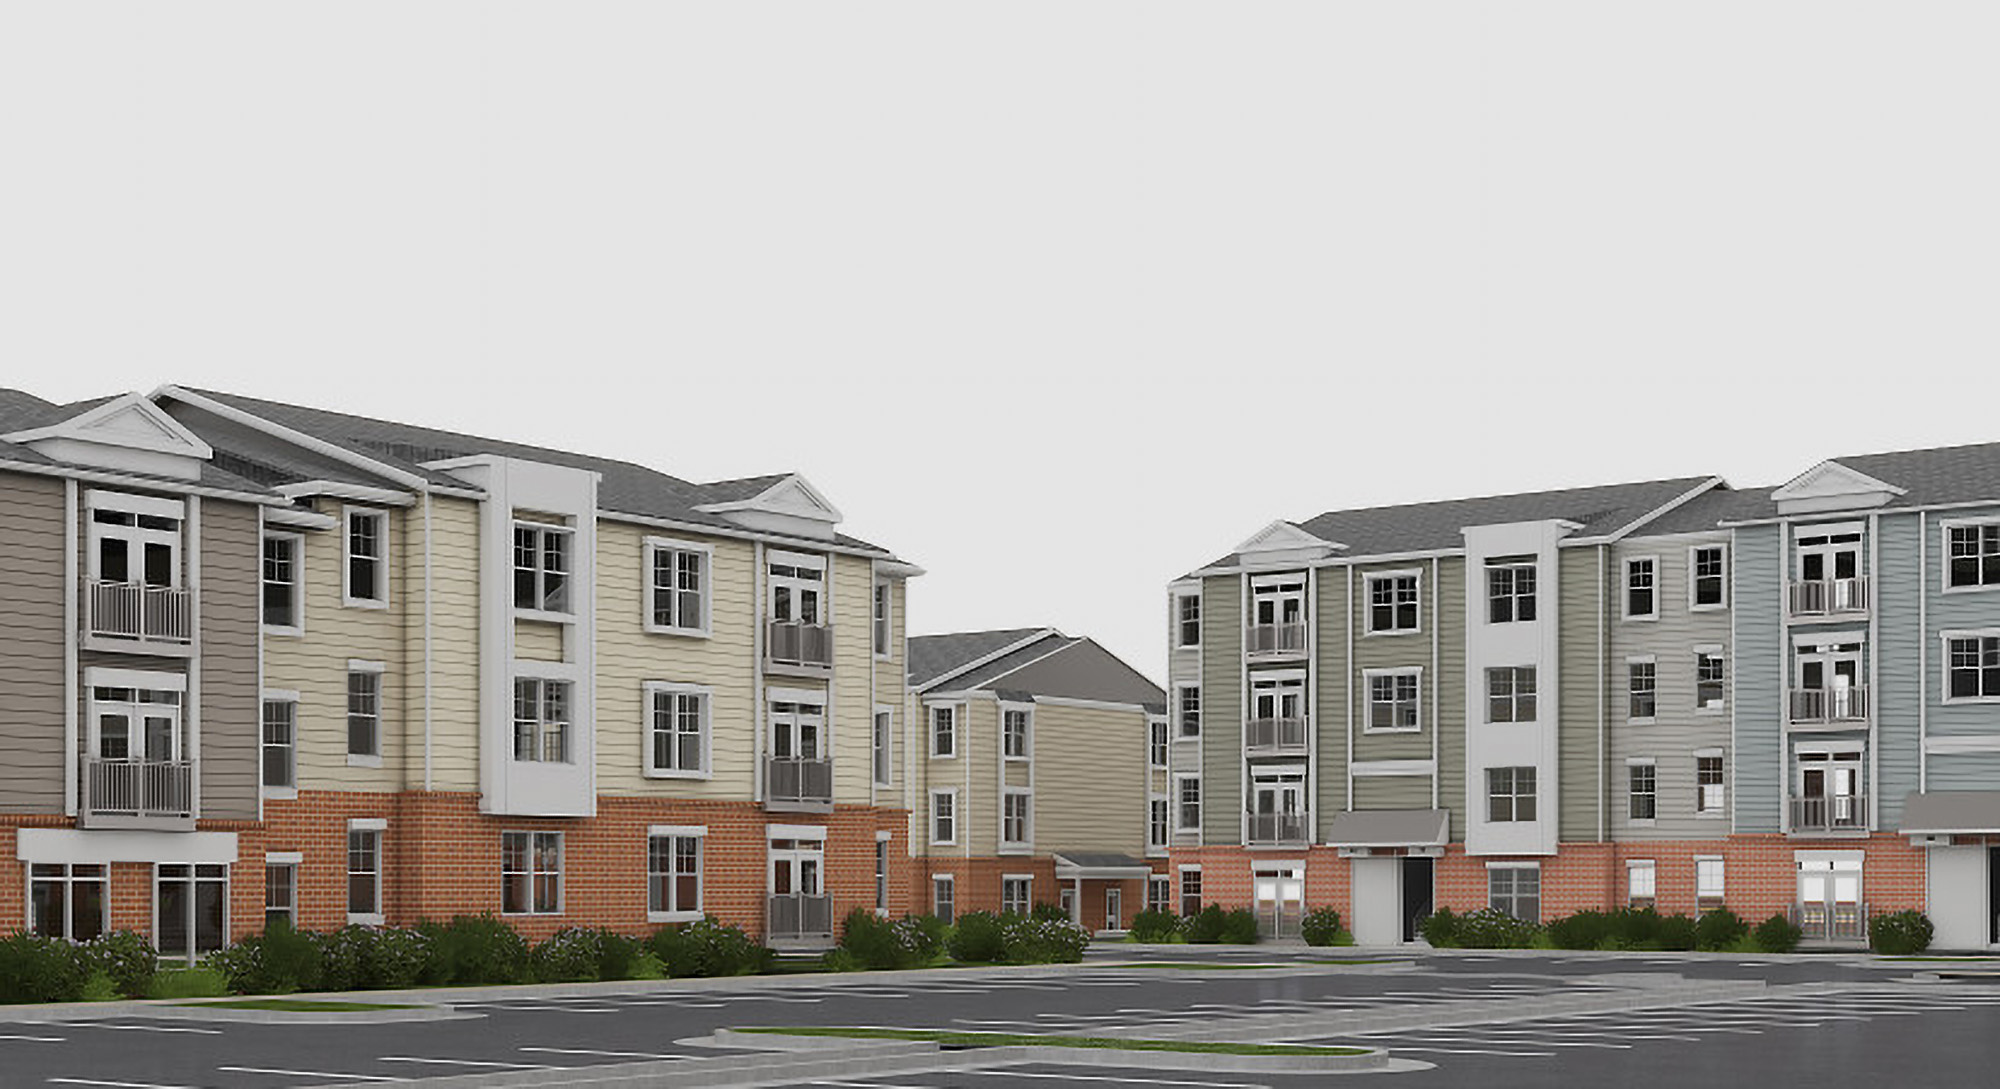 Affordable housing community built on the site of a former shopping center